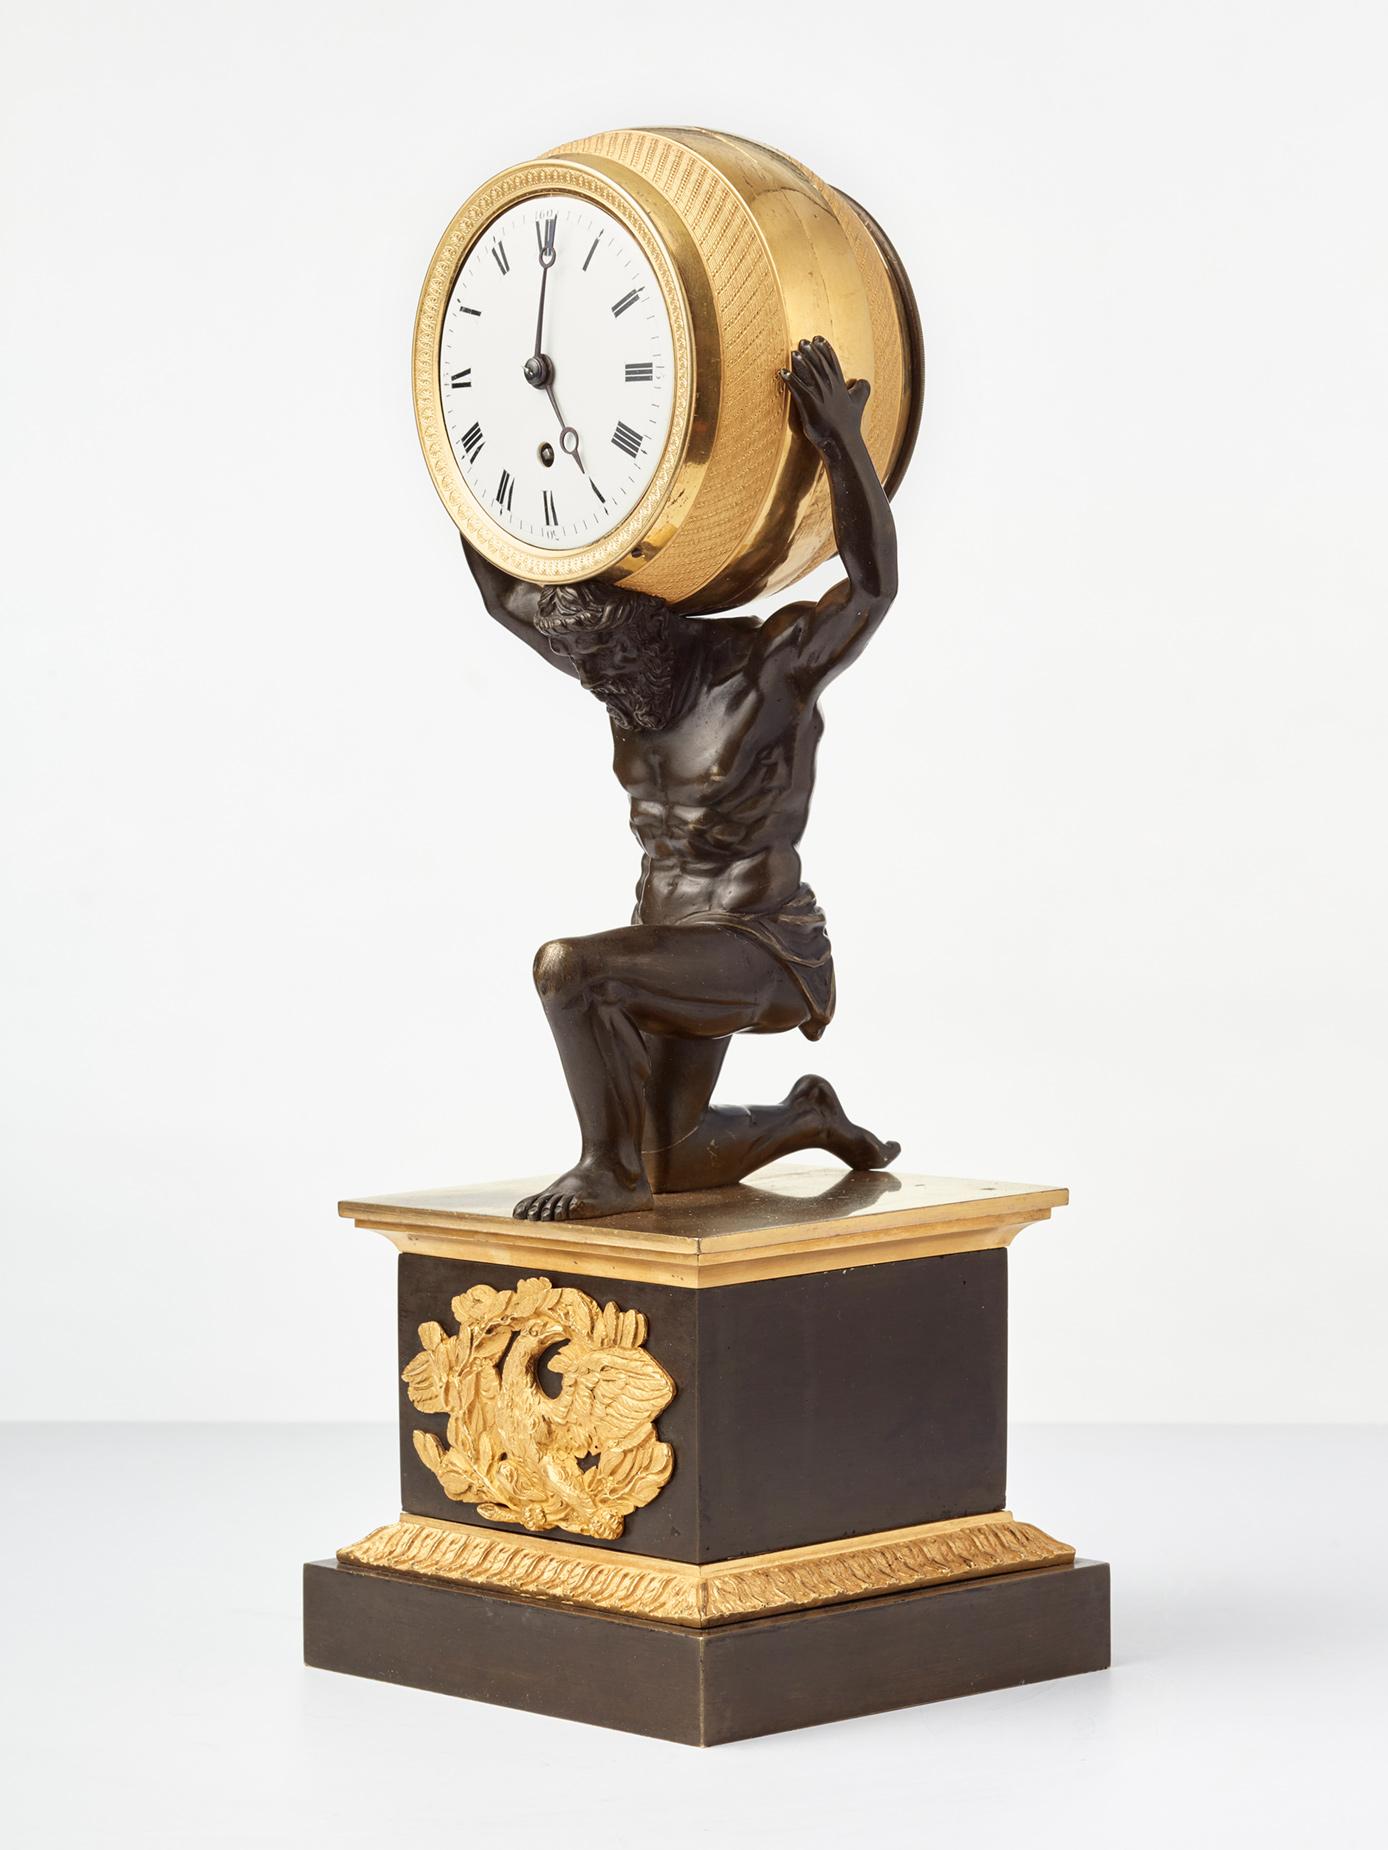 The company F. Baetens of London was a very well known maker of high quality sophisticated clock cases with incredible details. Their clocks were sold to high status titled or royal families. 

The patinated bronze figure of Atlas carries on his